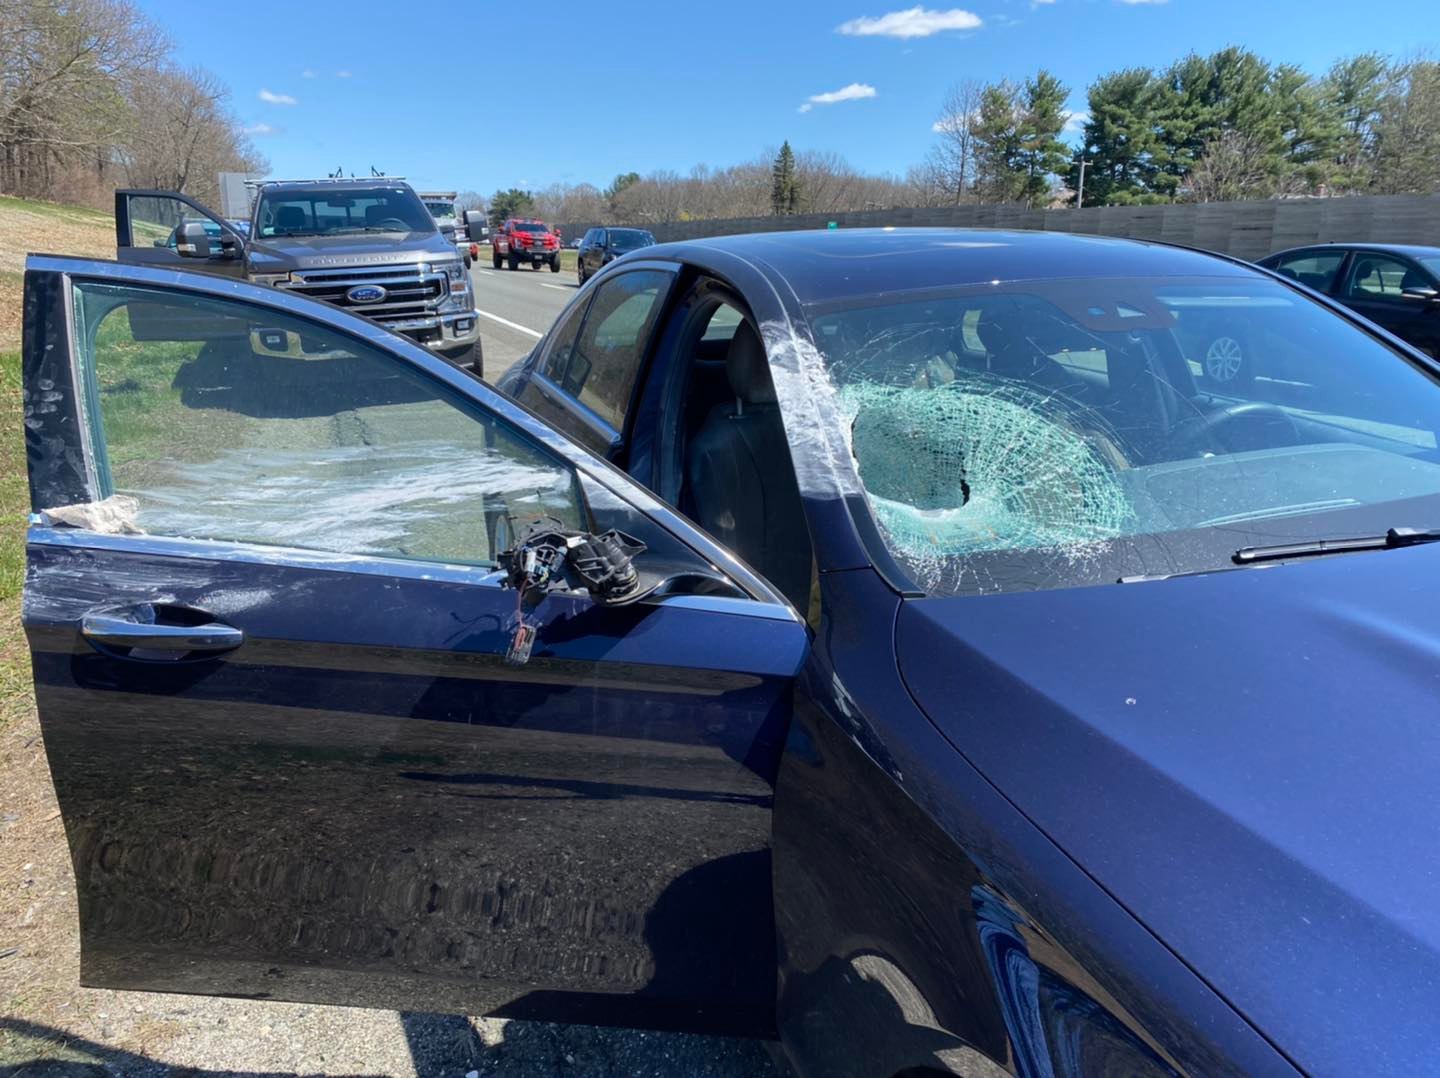 One sent to the hospital after unsecured load crashes through windshield on Massachusetts highway